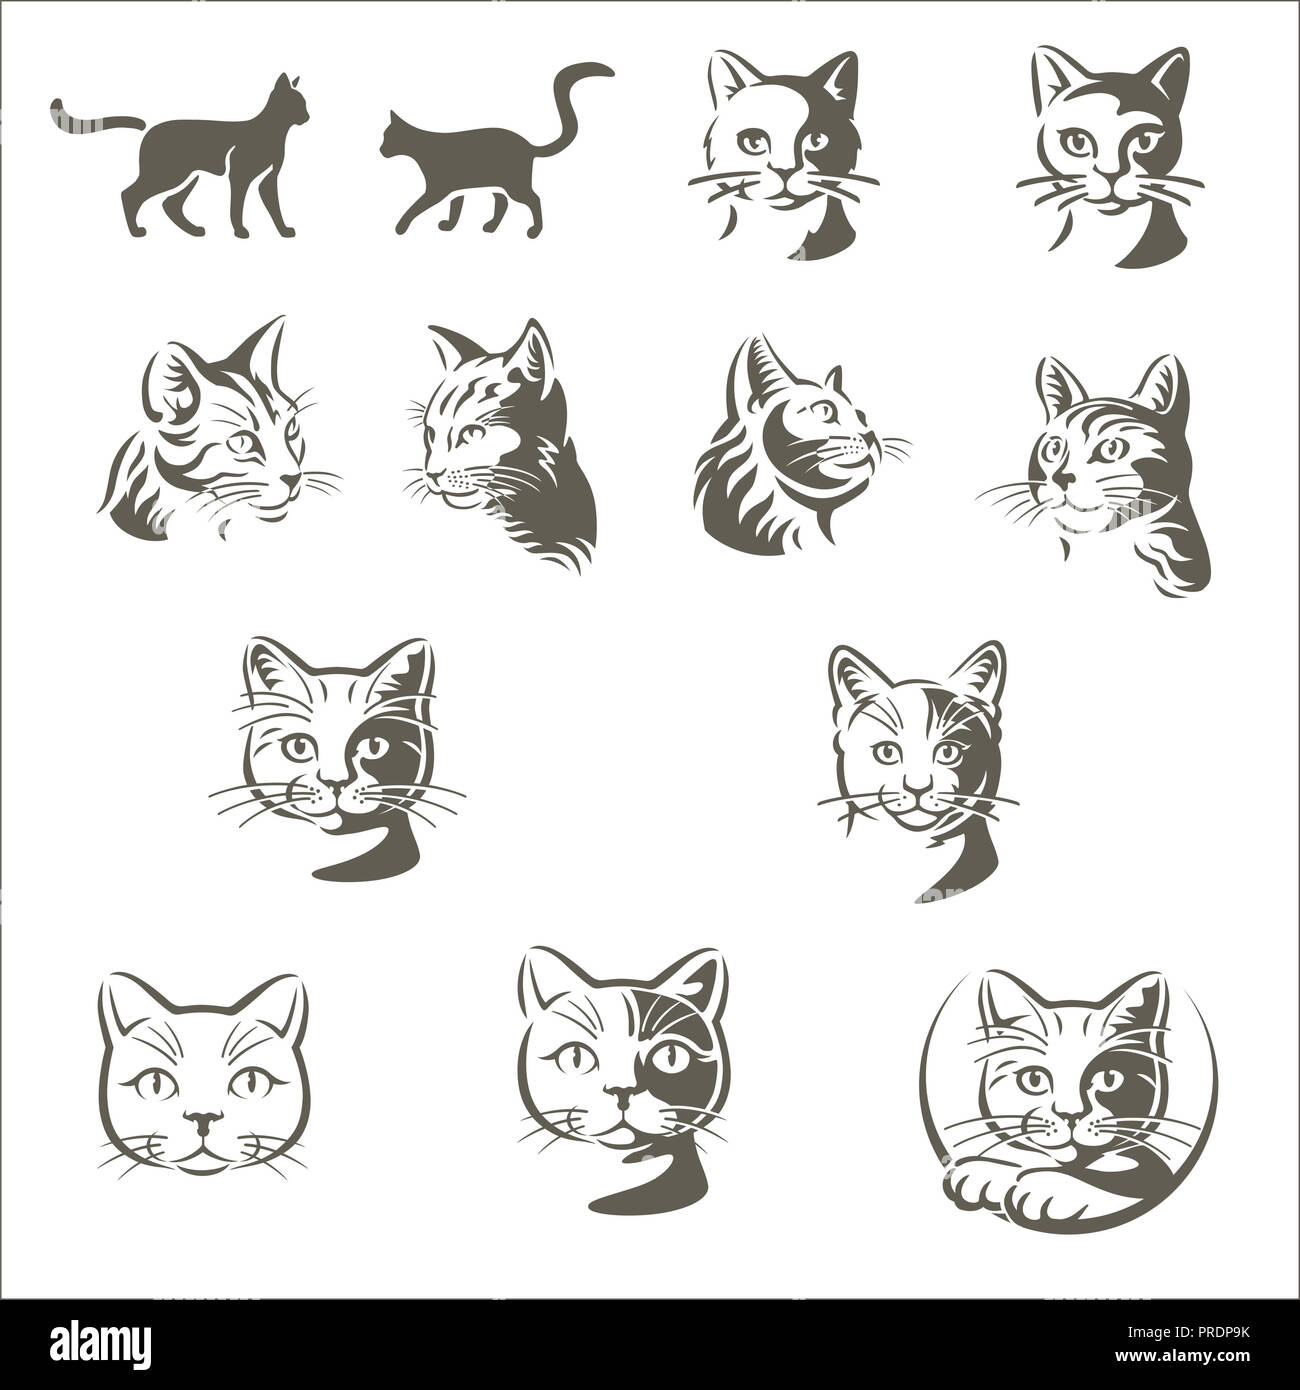 Cats on white background Stock Photo